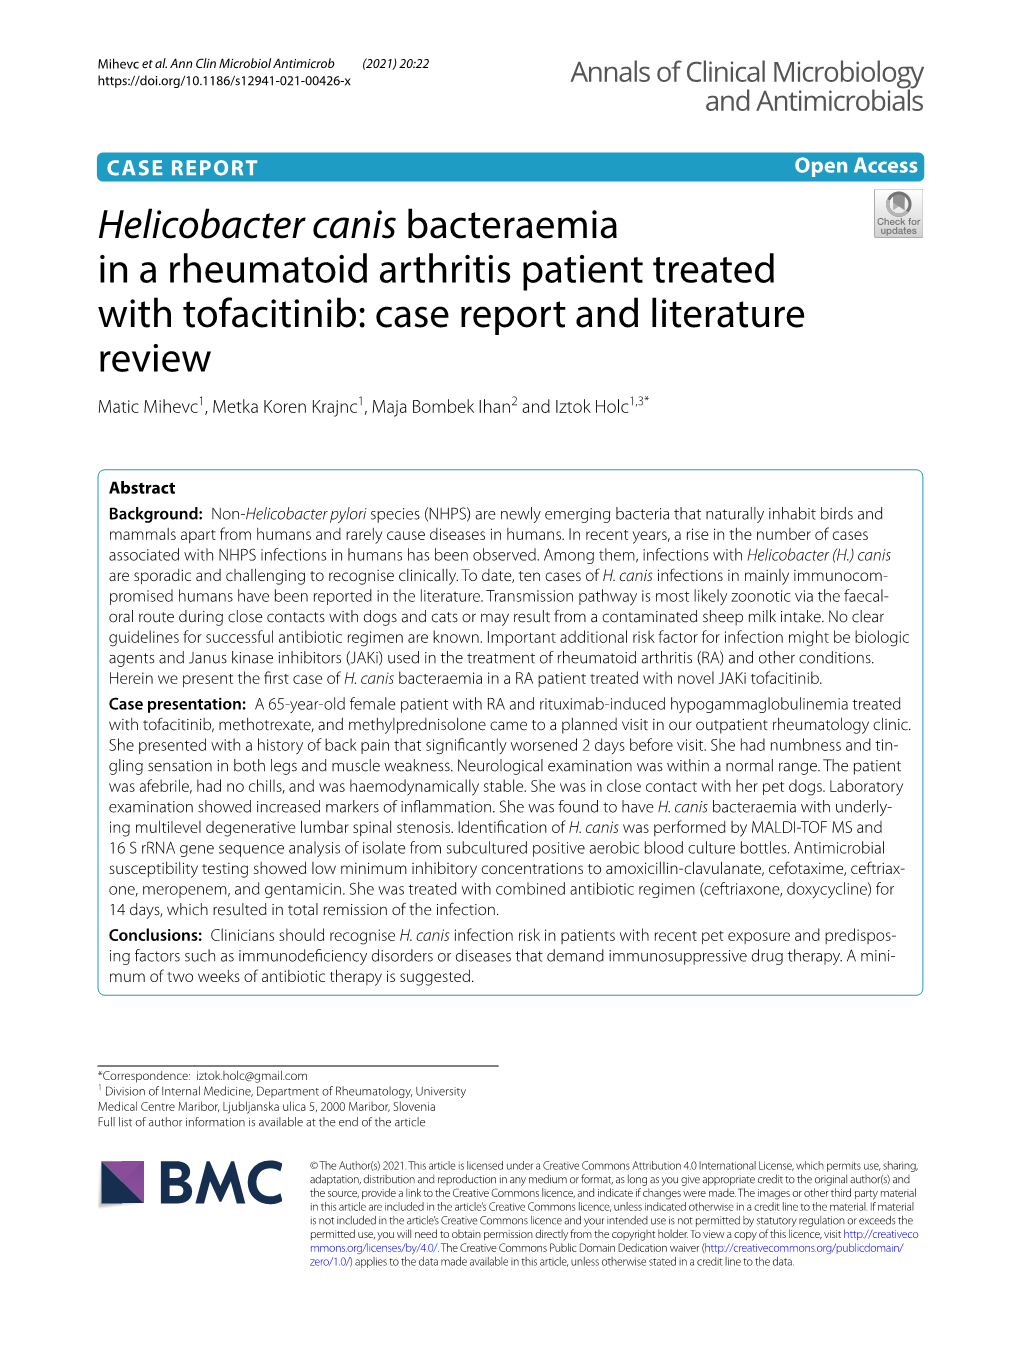 Helicobacter Canis Bacteraemia in a Rheumatoid Arthritis Patient Treated